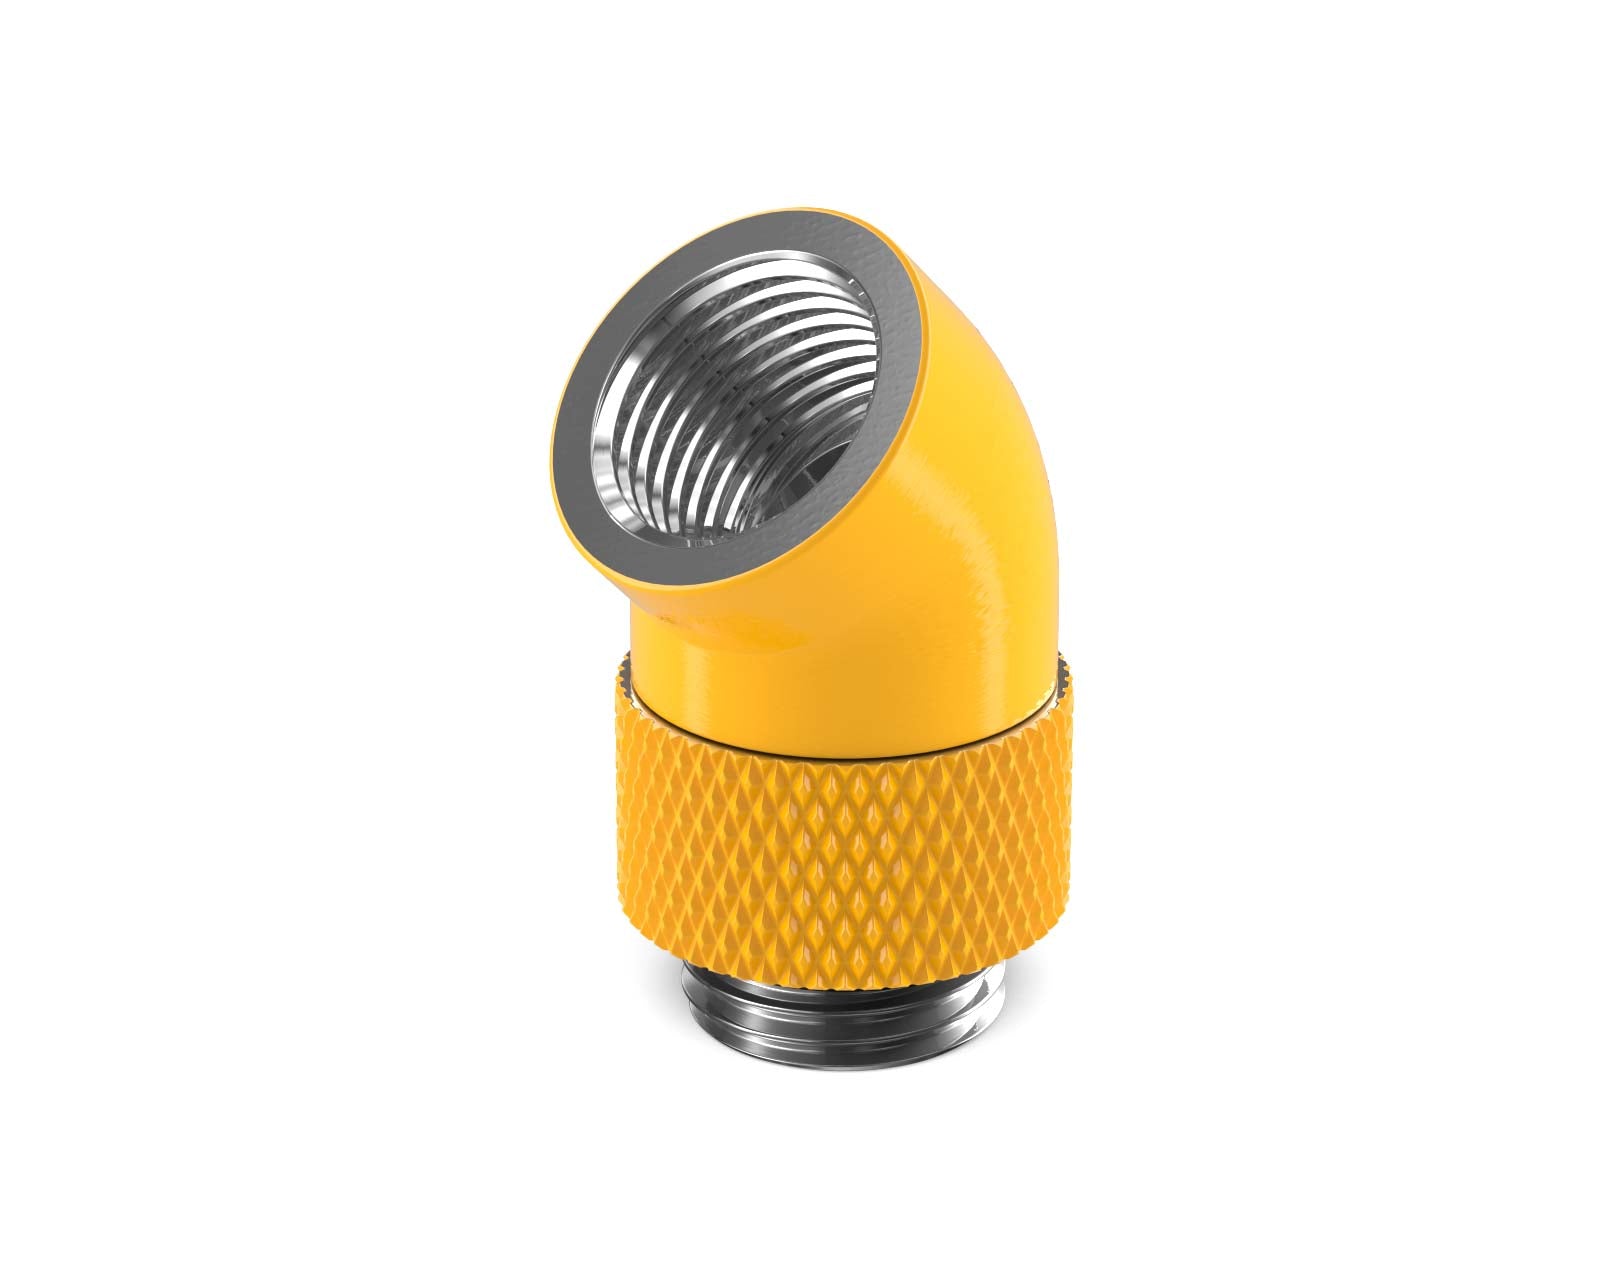 PrimoChill Male to Female G 1/4in. 45 Degree SX Rotary Elbow Fitting - PrimoChill - KEEPING IT COOL Yellow